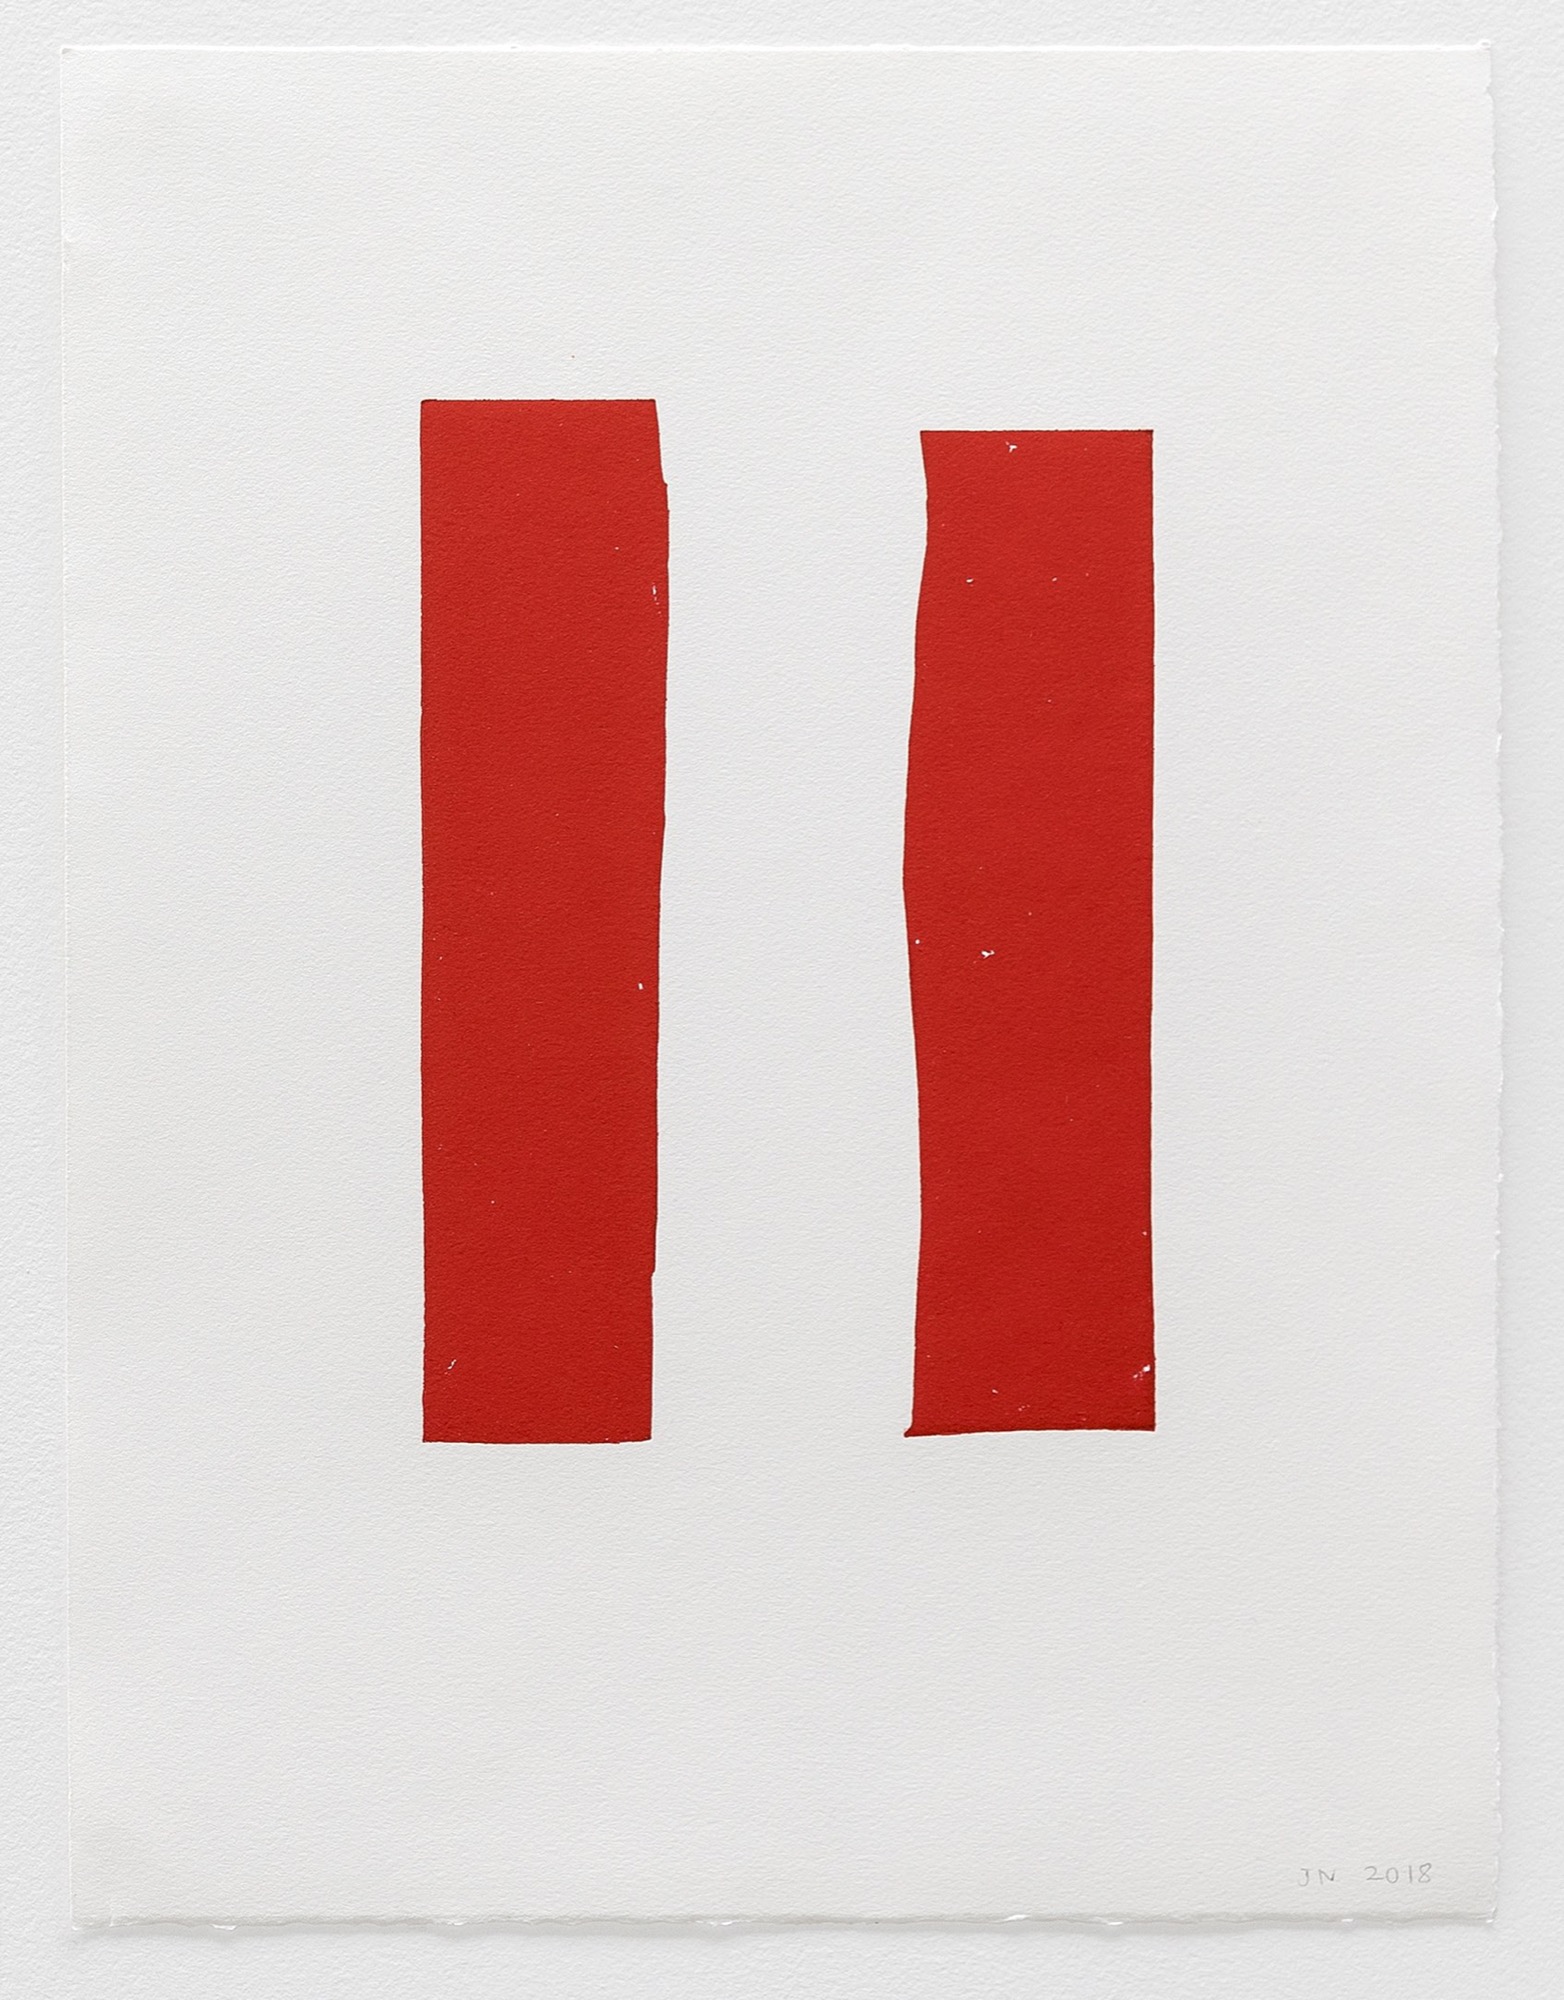 John Nixon (printer, Trent Walter), <em>Untitled (Set F)</em> (detail), 2018, relief print, printed in red ink, from two rubber blocks, 49.0 x 38.0 cm, edition: 1/1. Published by Negative Press. Photograph: Andrew Curtis.